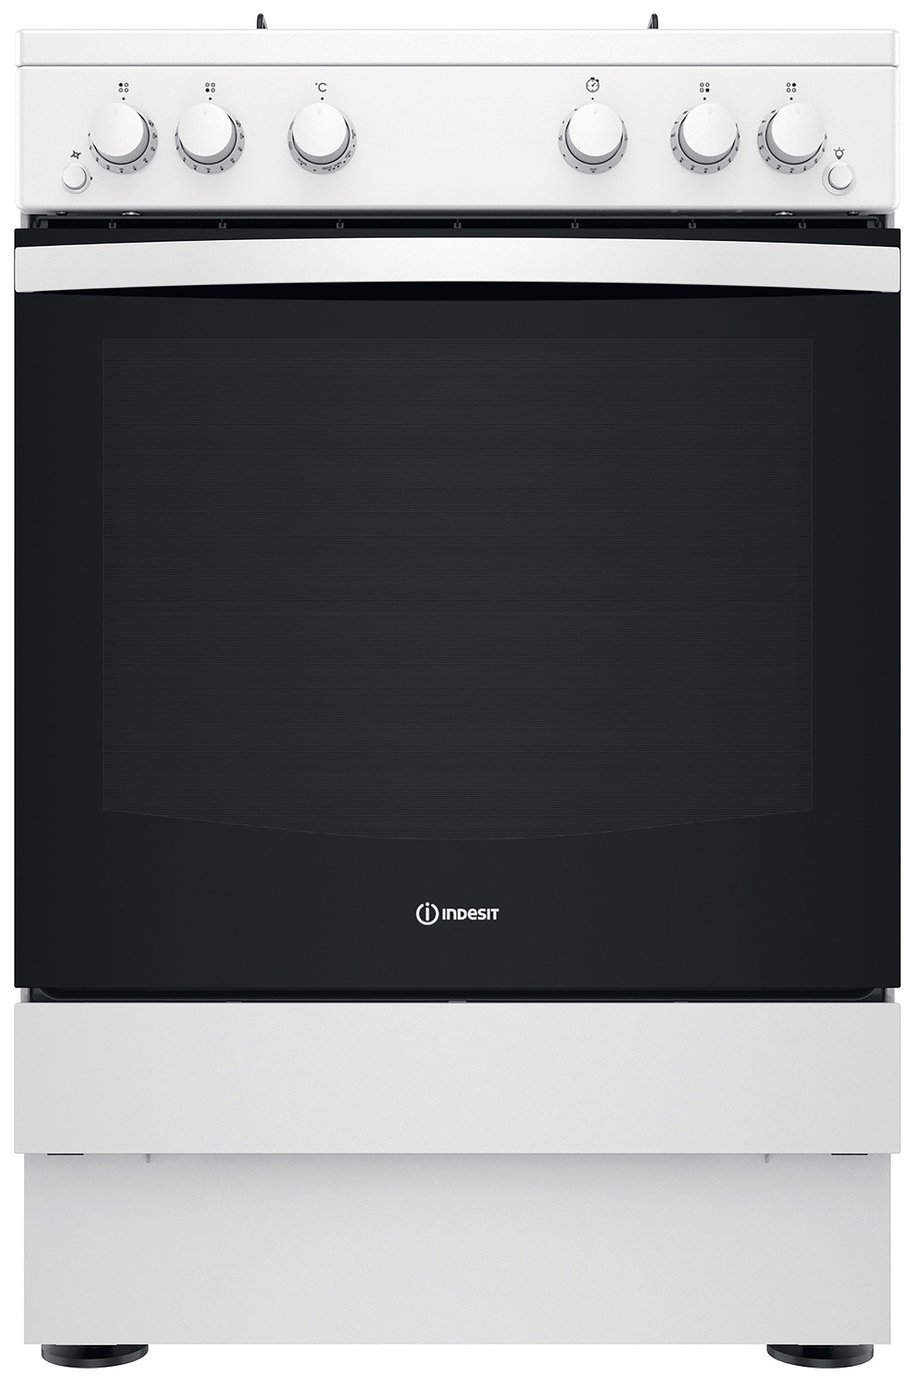 Indesit IS67G1PMW/UK 60cm Single Oven Gas Cooker - White